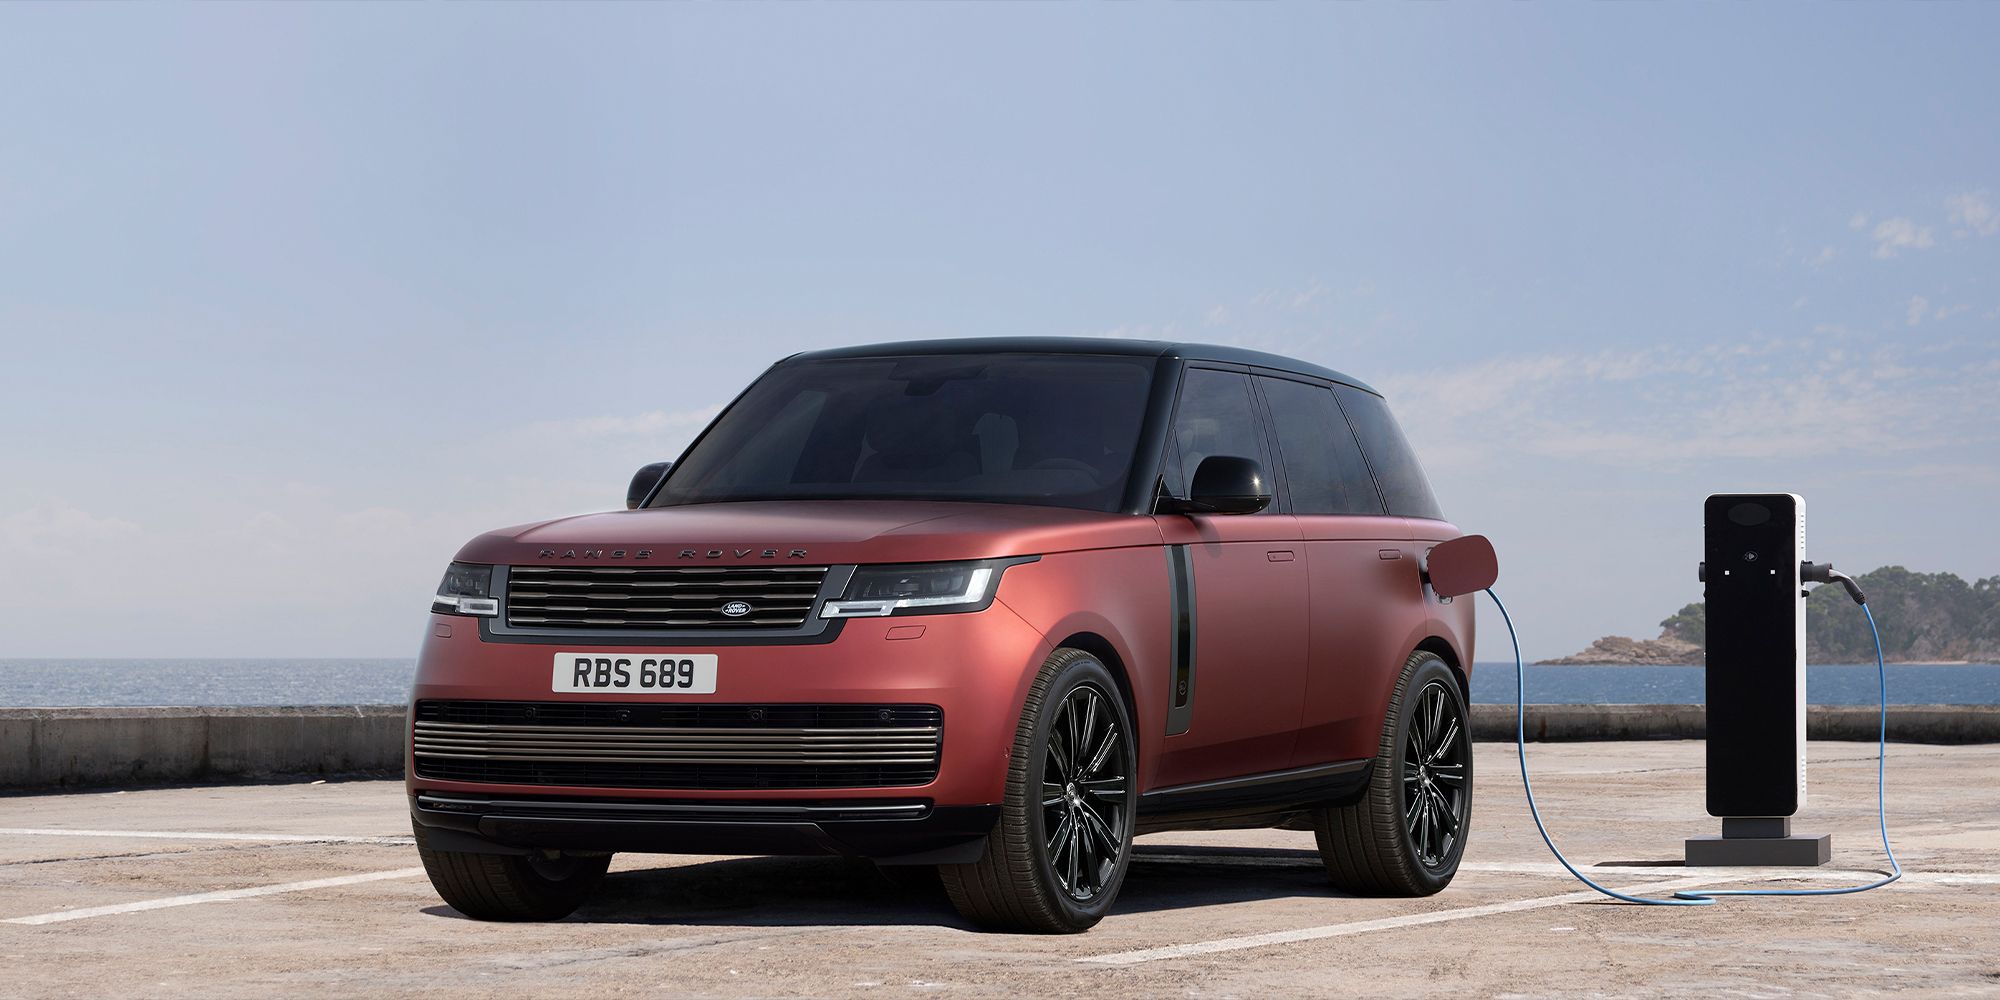 The front of the new Range Rover, plugged in